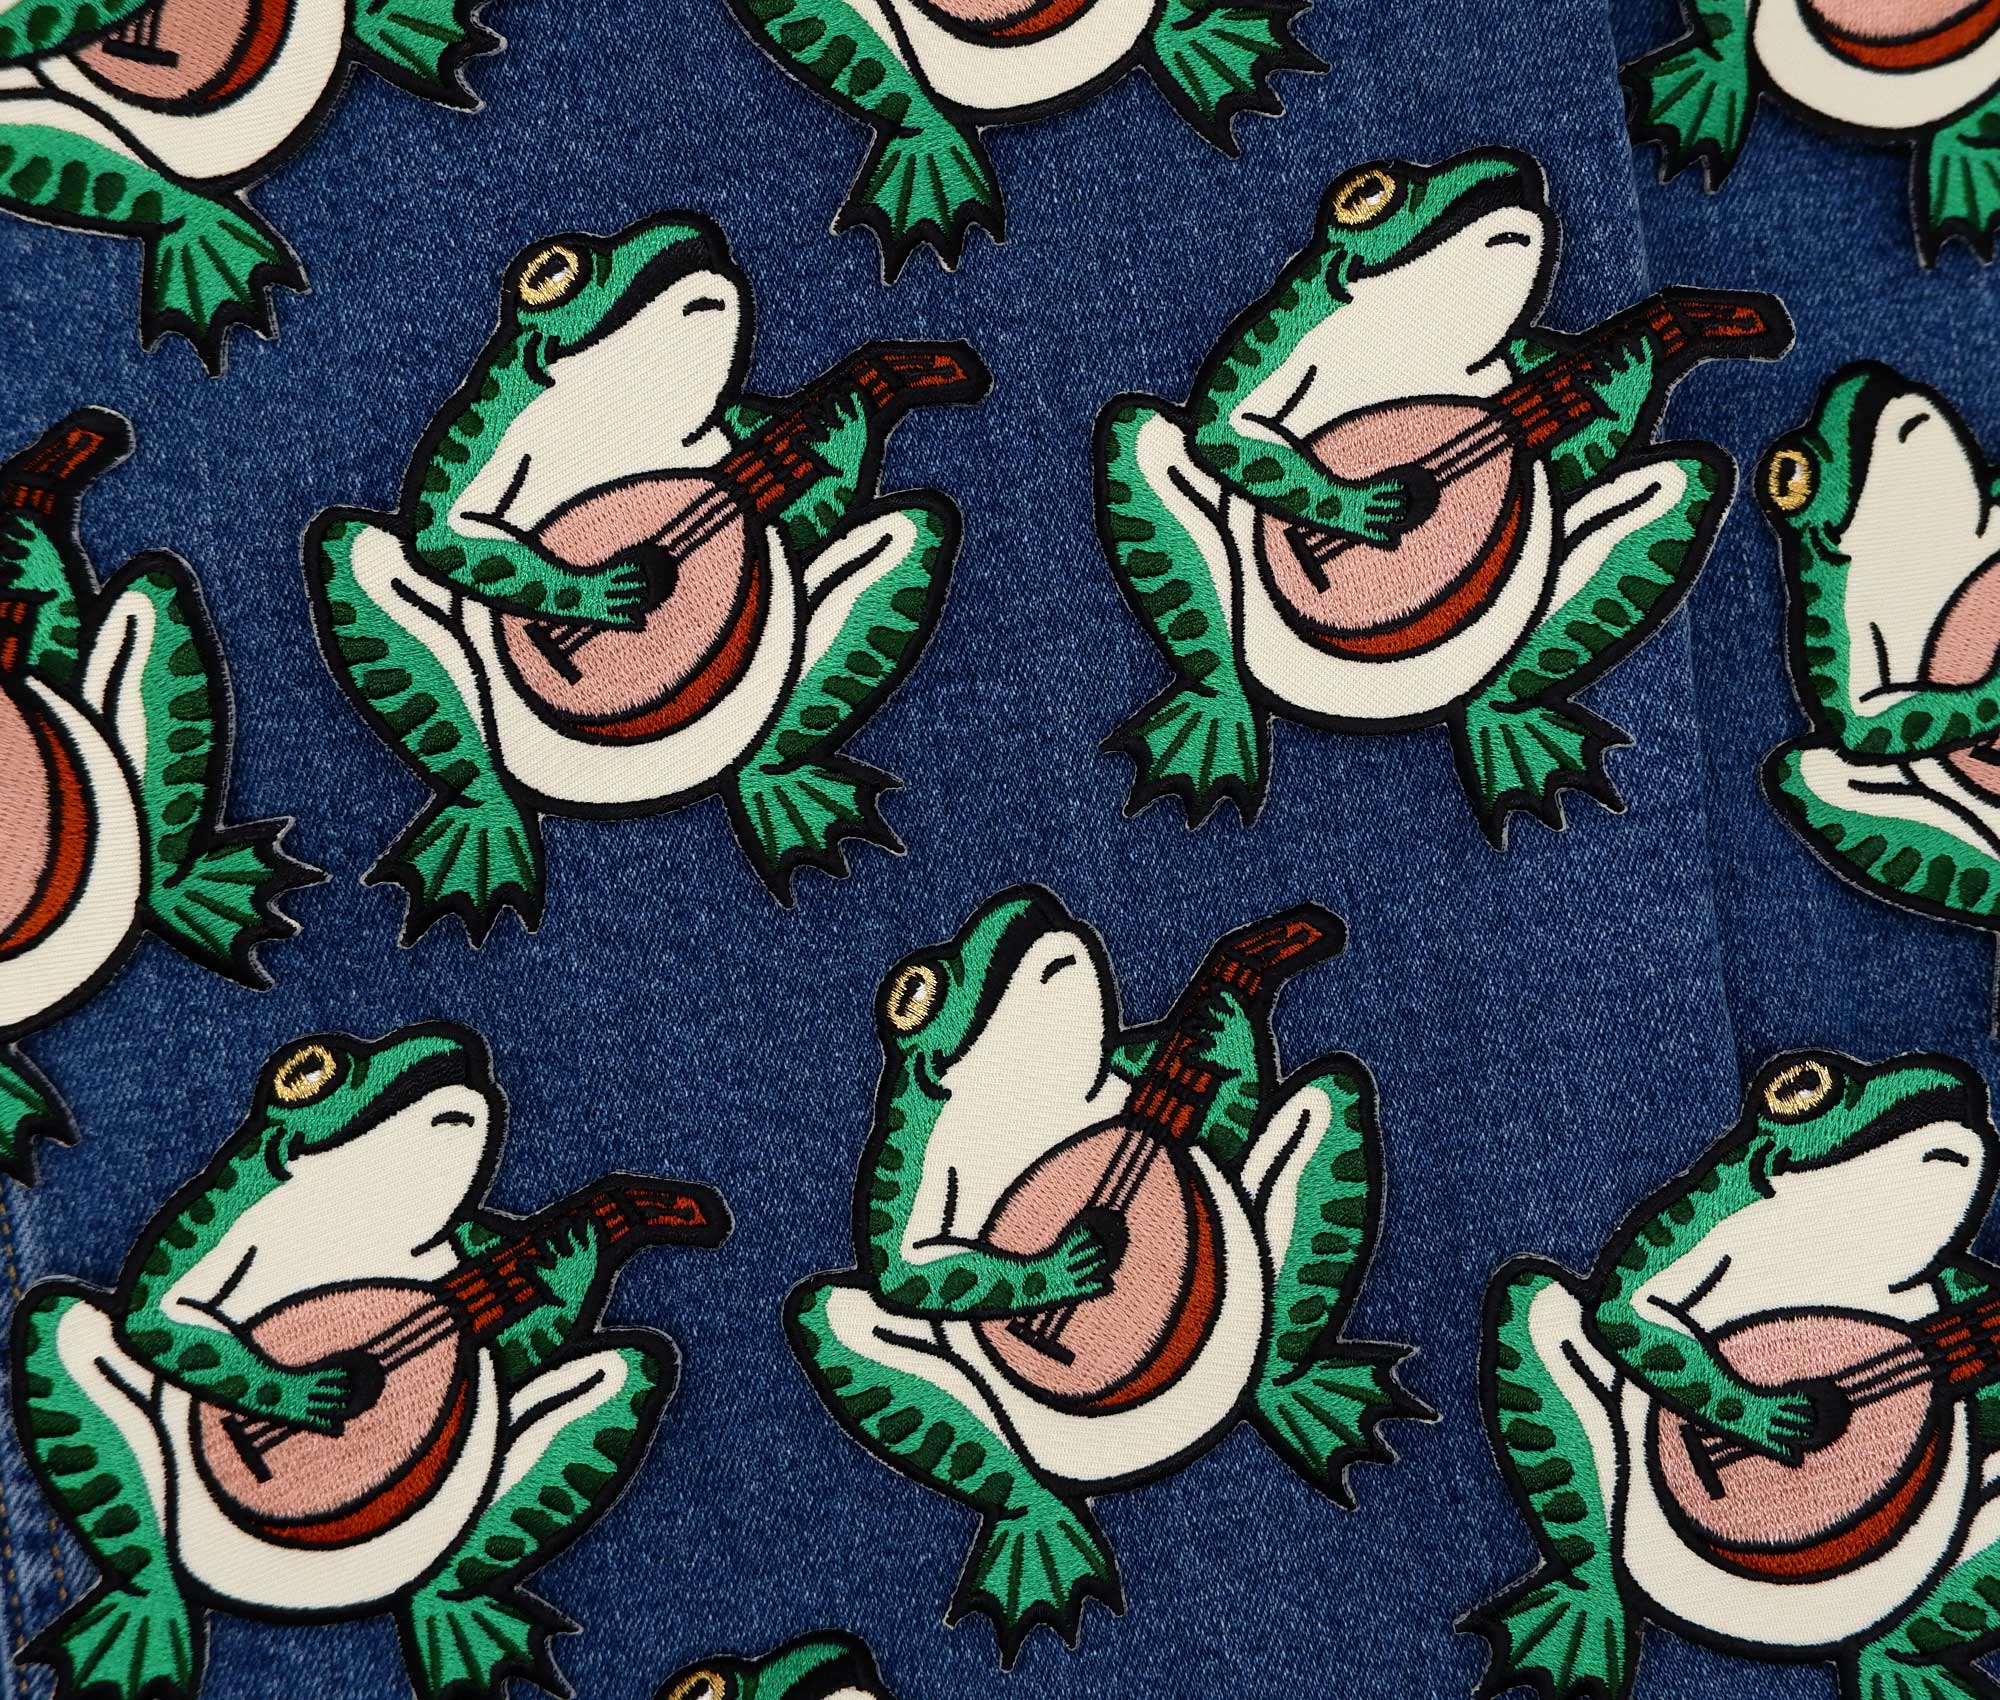 Frog Serenade - Embroidered Patch - Space Camp